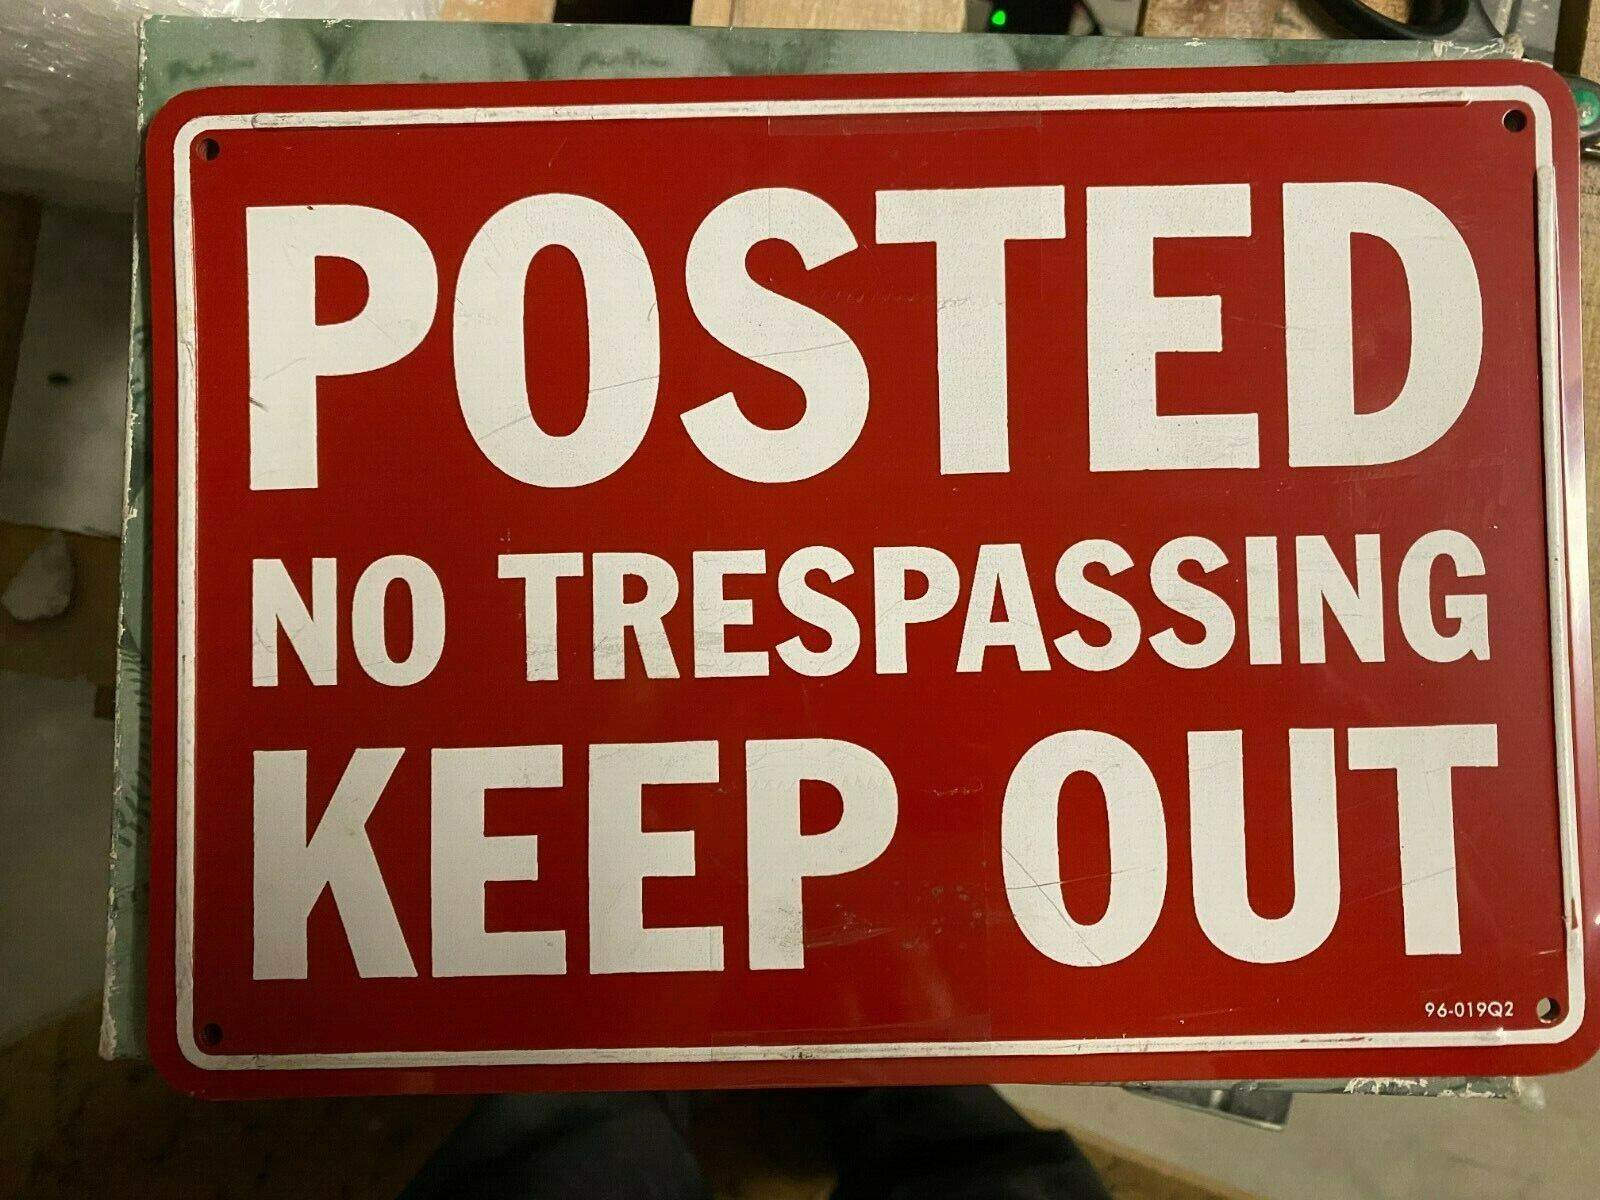 POSTED NO TRESPASSING KEEP OUT 10 x 7 WARNING SIGN, METAL. 4 PACK